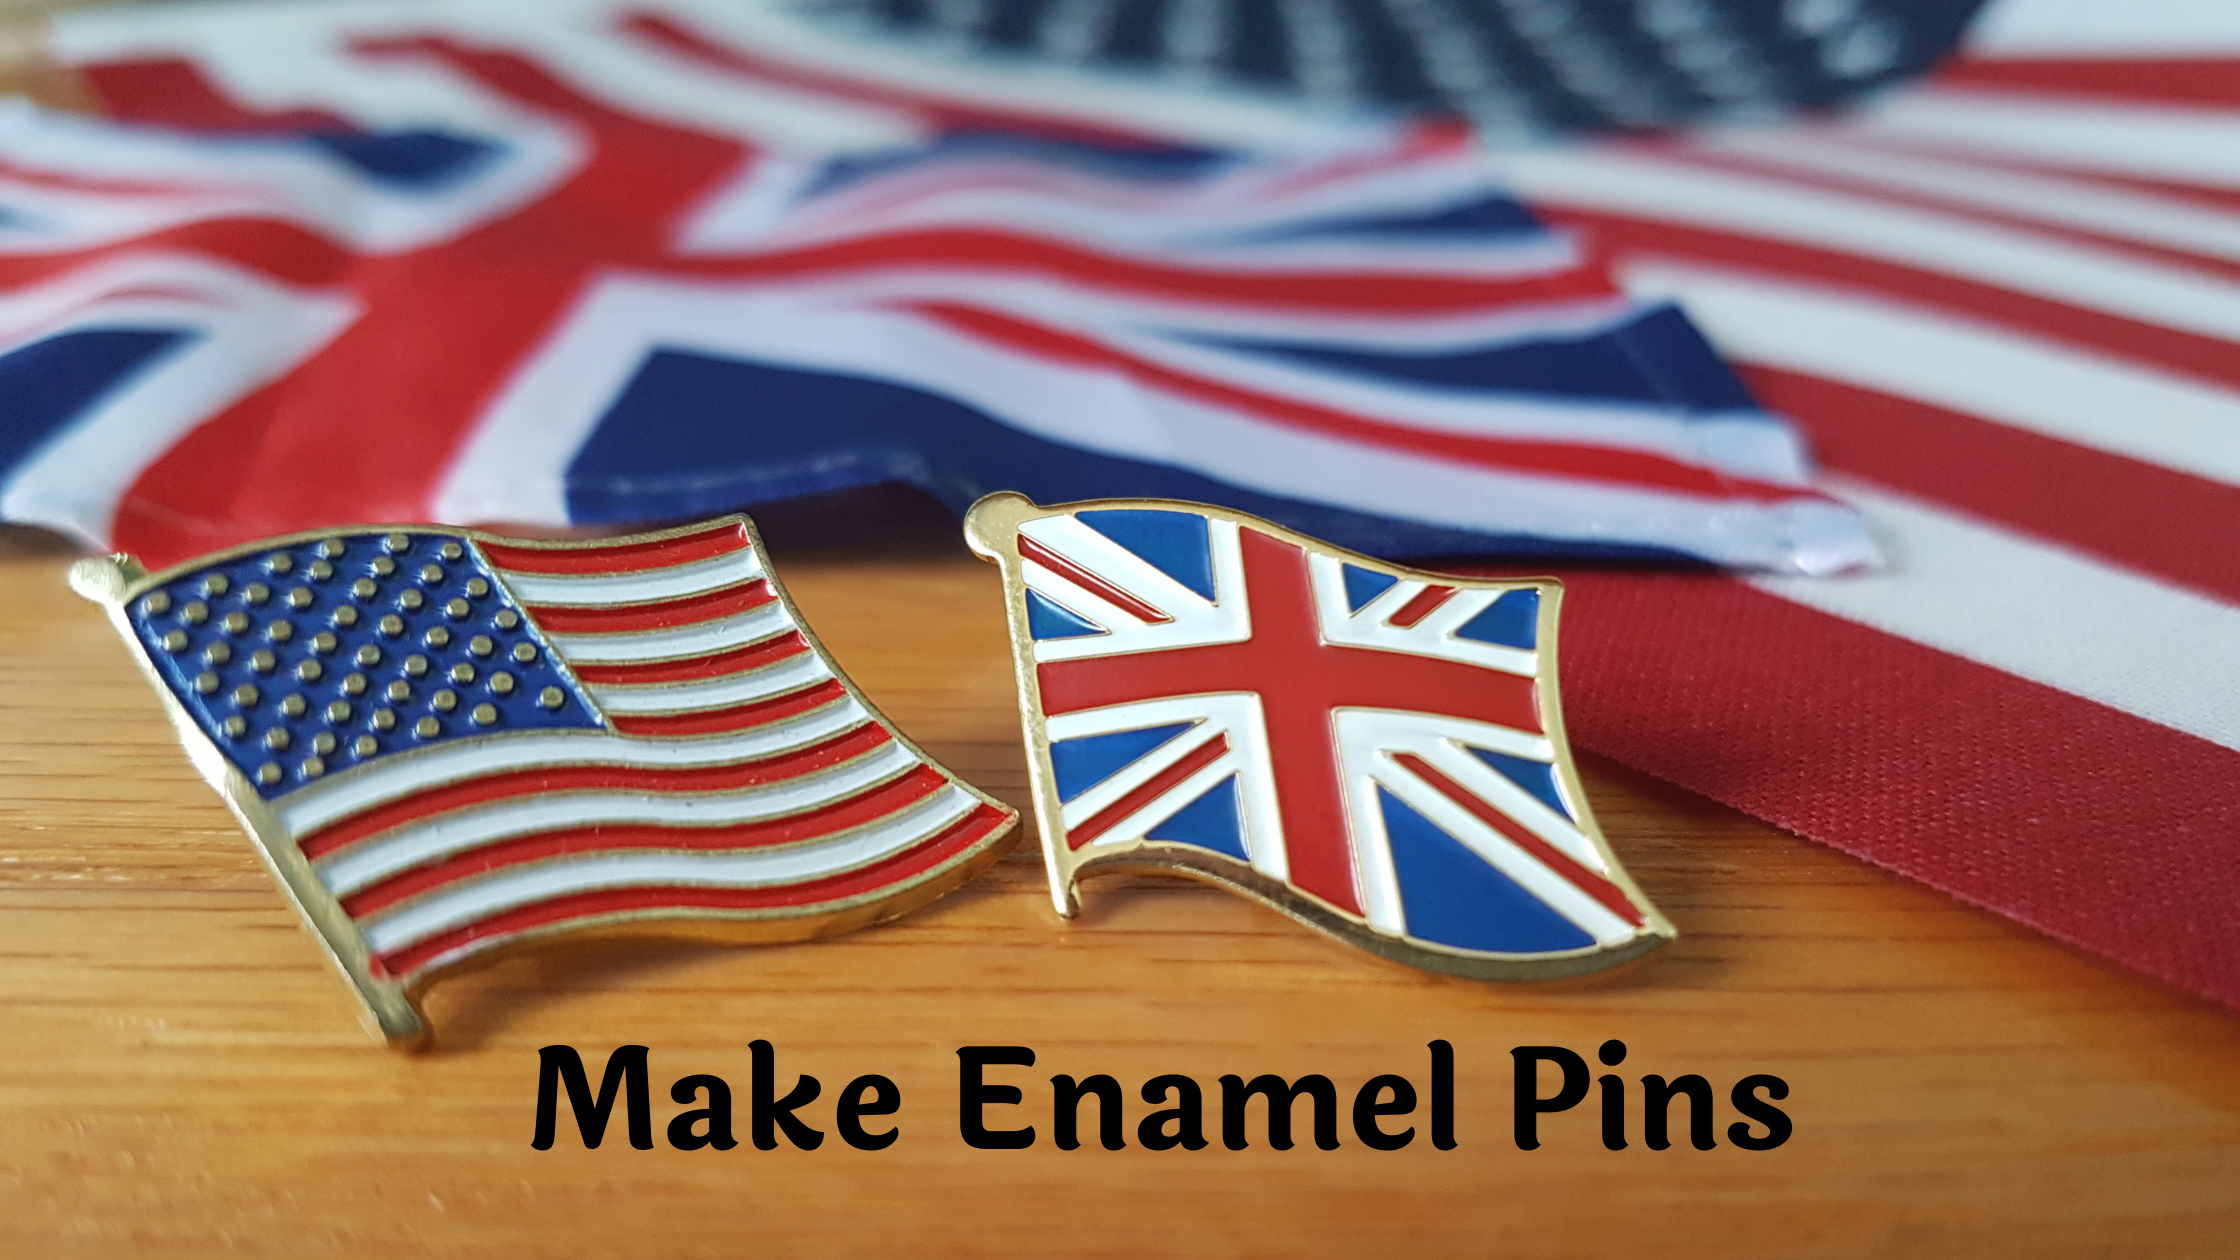 How to Make Enamel Pins